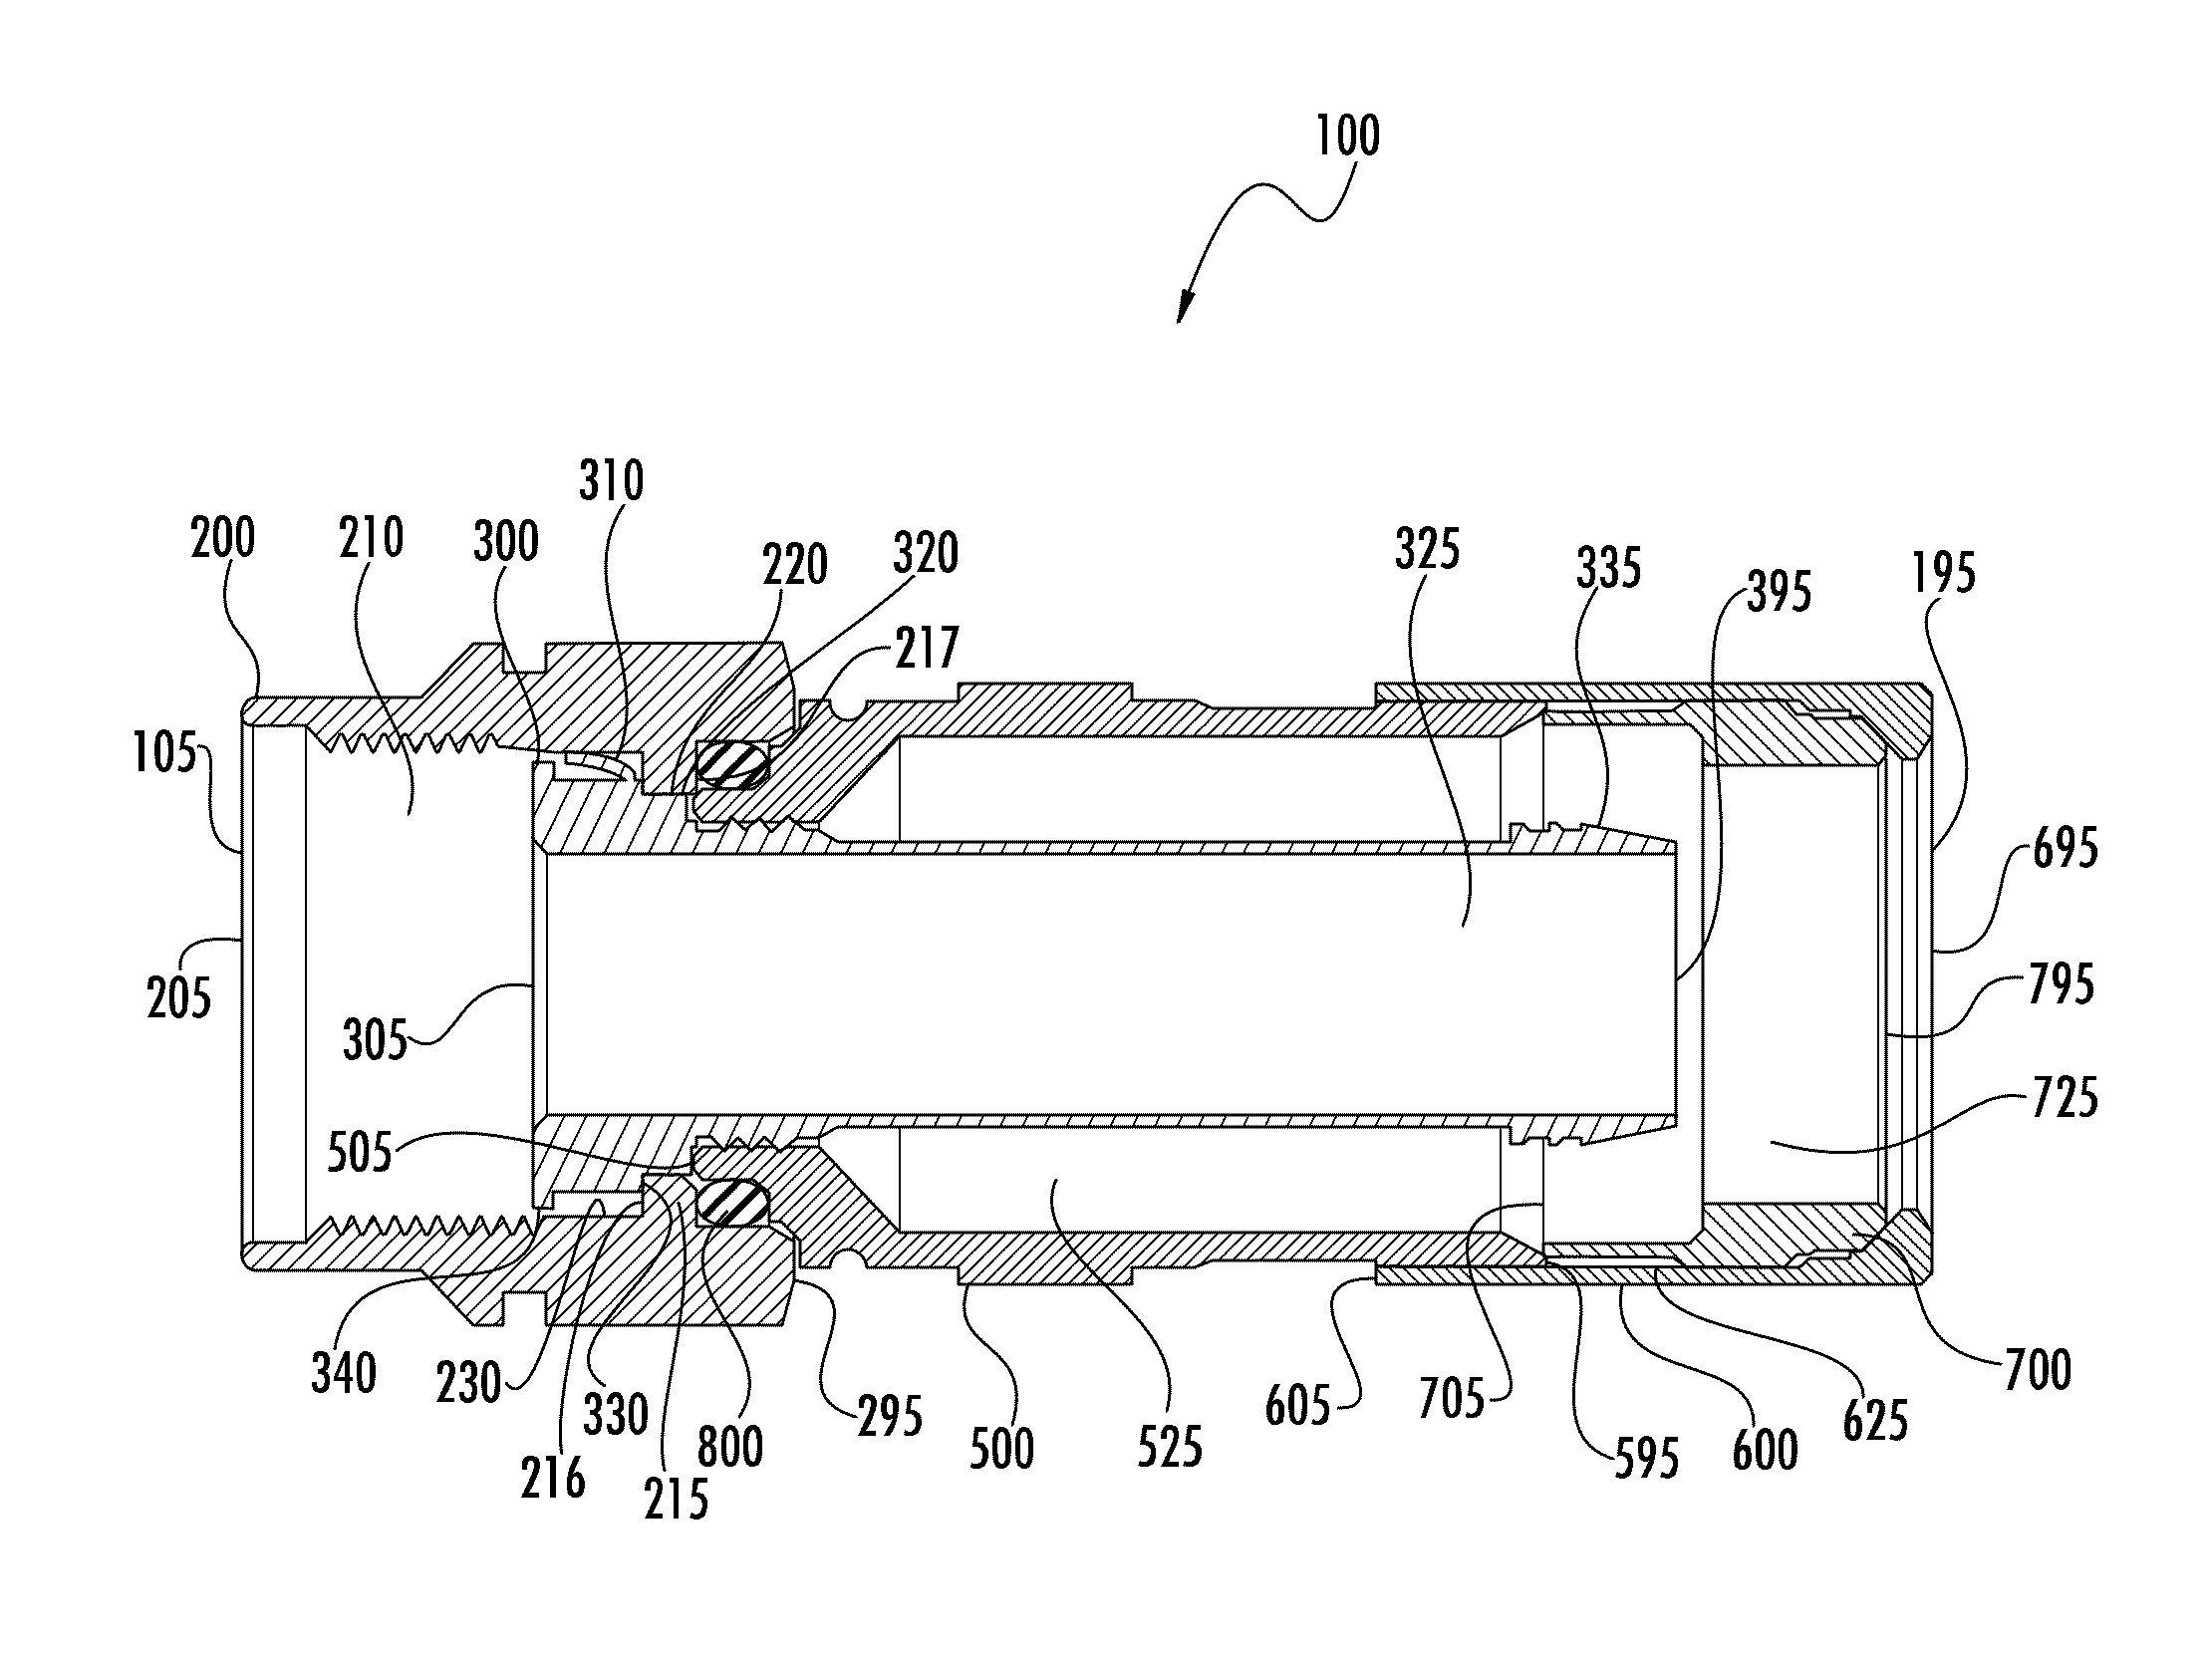 Coaxial cable connector with integral continuity contacting portion